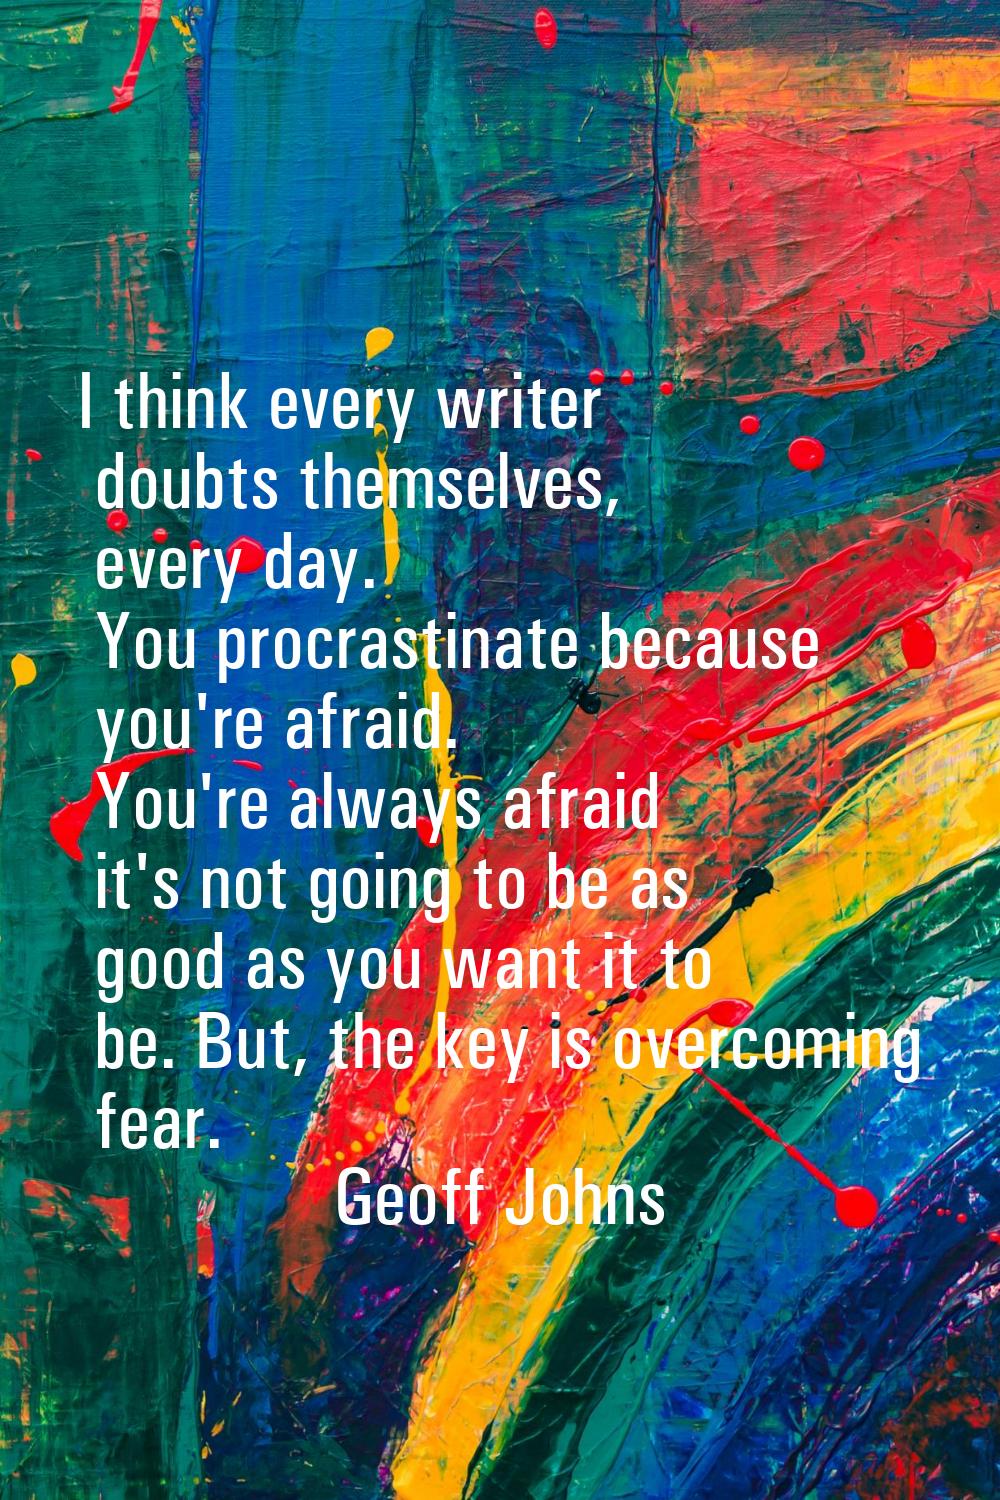 I think every writer doubts themselves, every day. You procrastinate because you're afraid. You're 